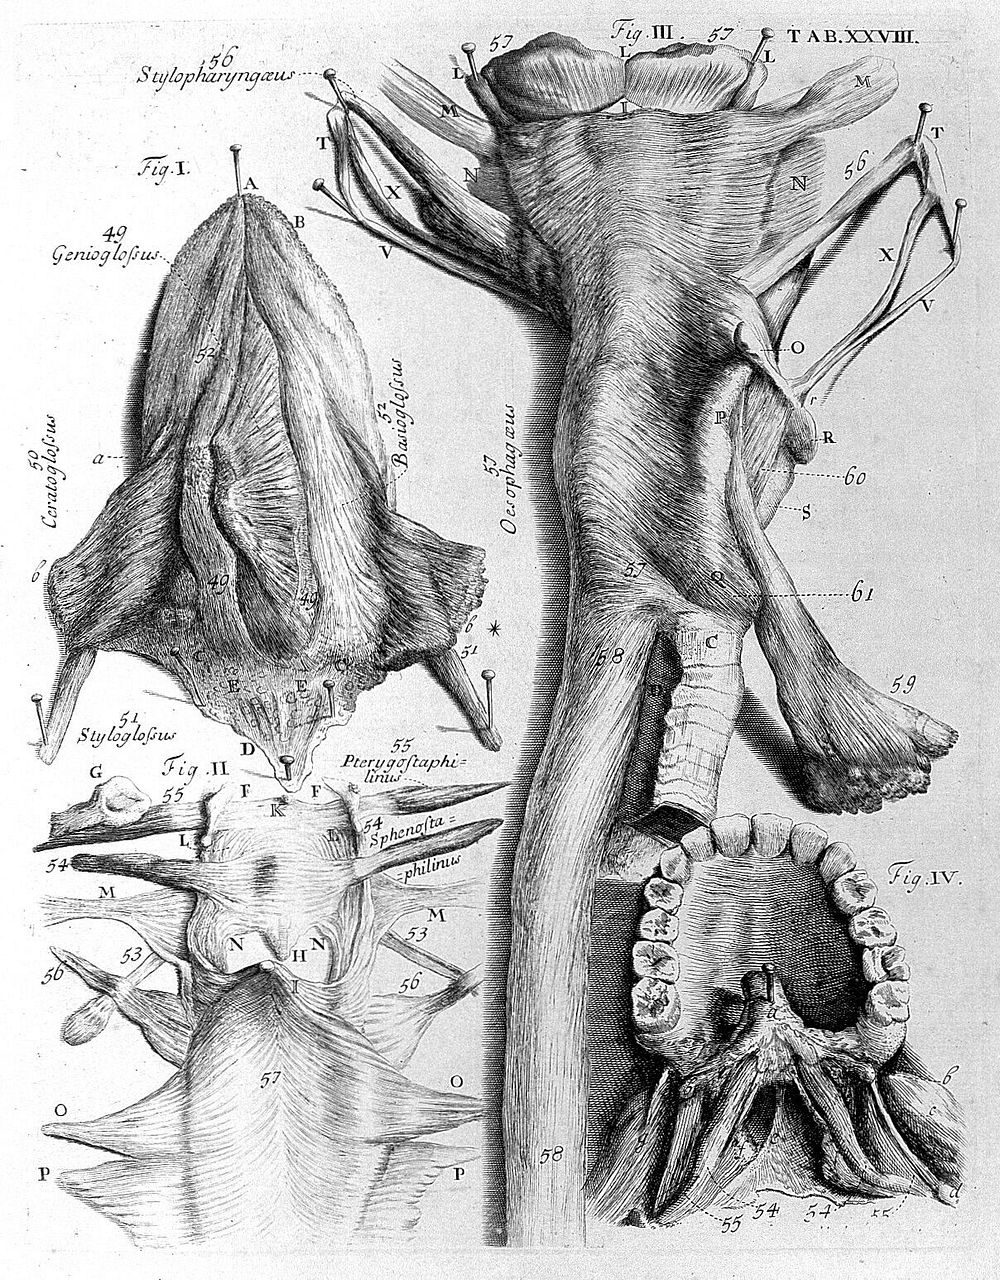 Myotomia reformata: or an anatomical treatise on the muscles of the human body ... To which is prefix'd an introduction…